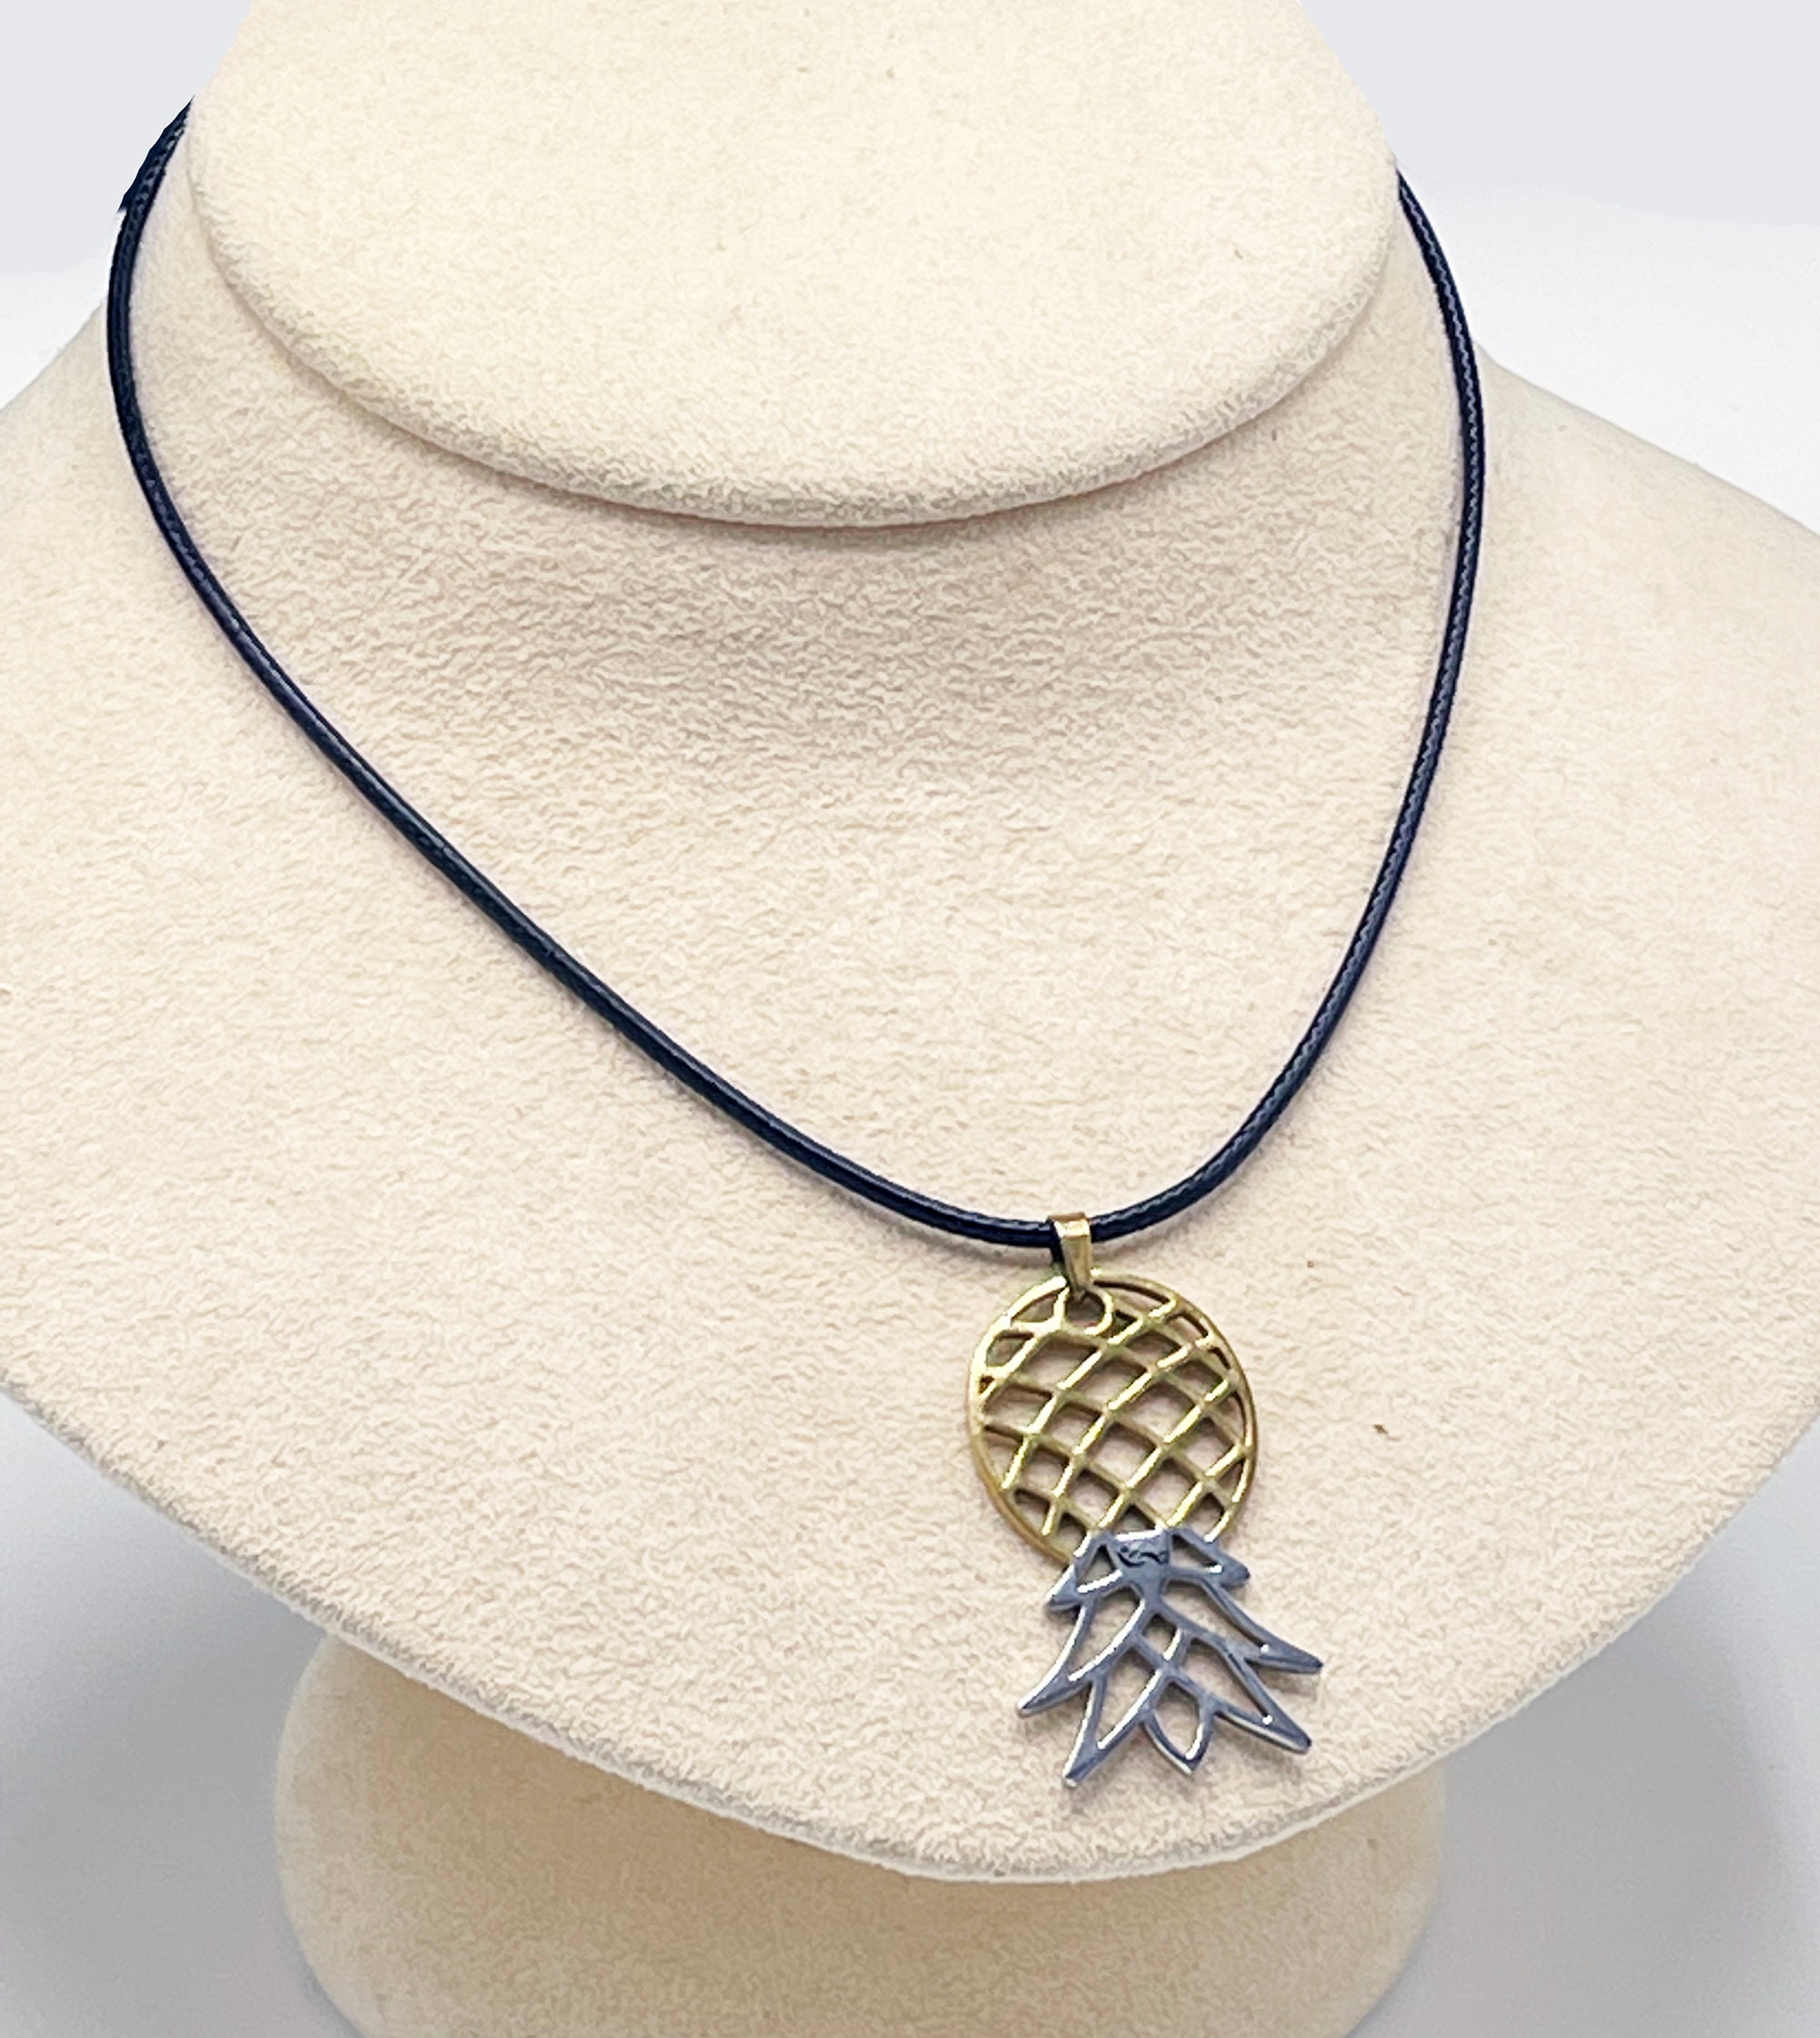 Upside Down Pineapple Expandable Eva Pendant Necklace In Gift Bag